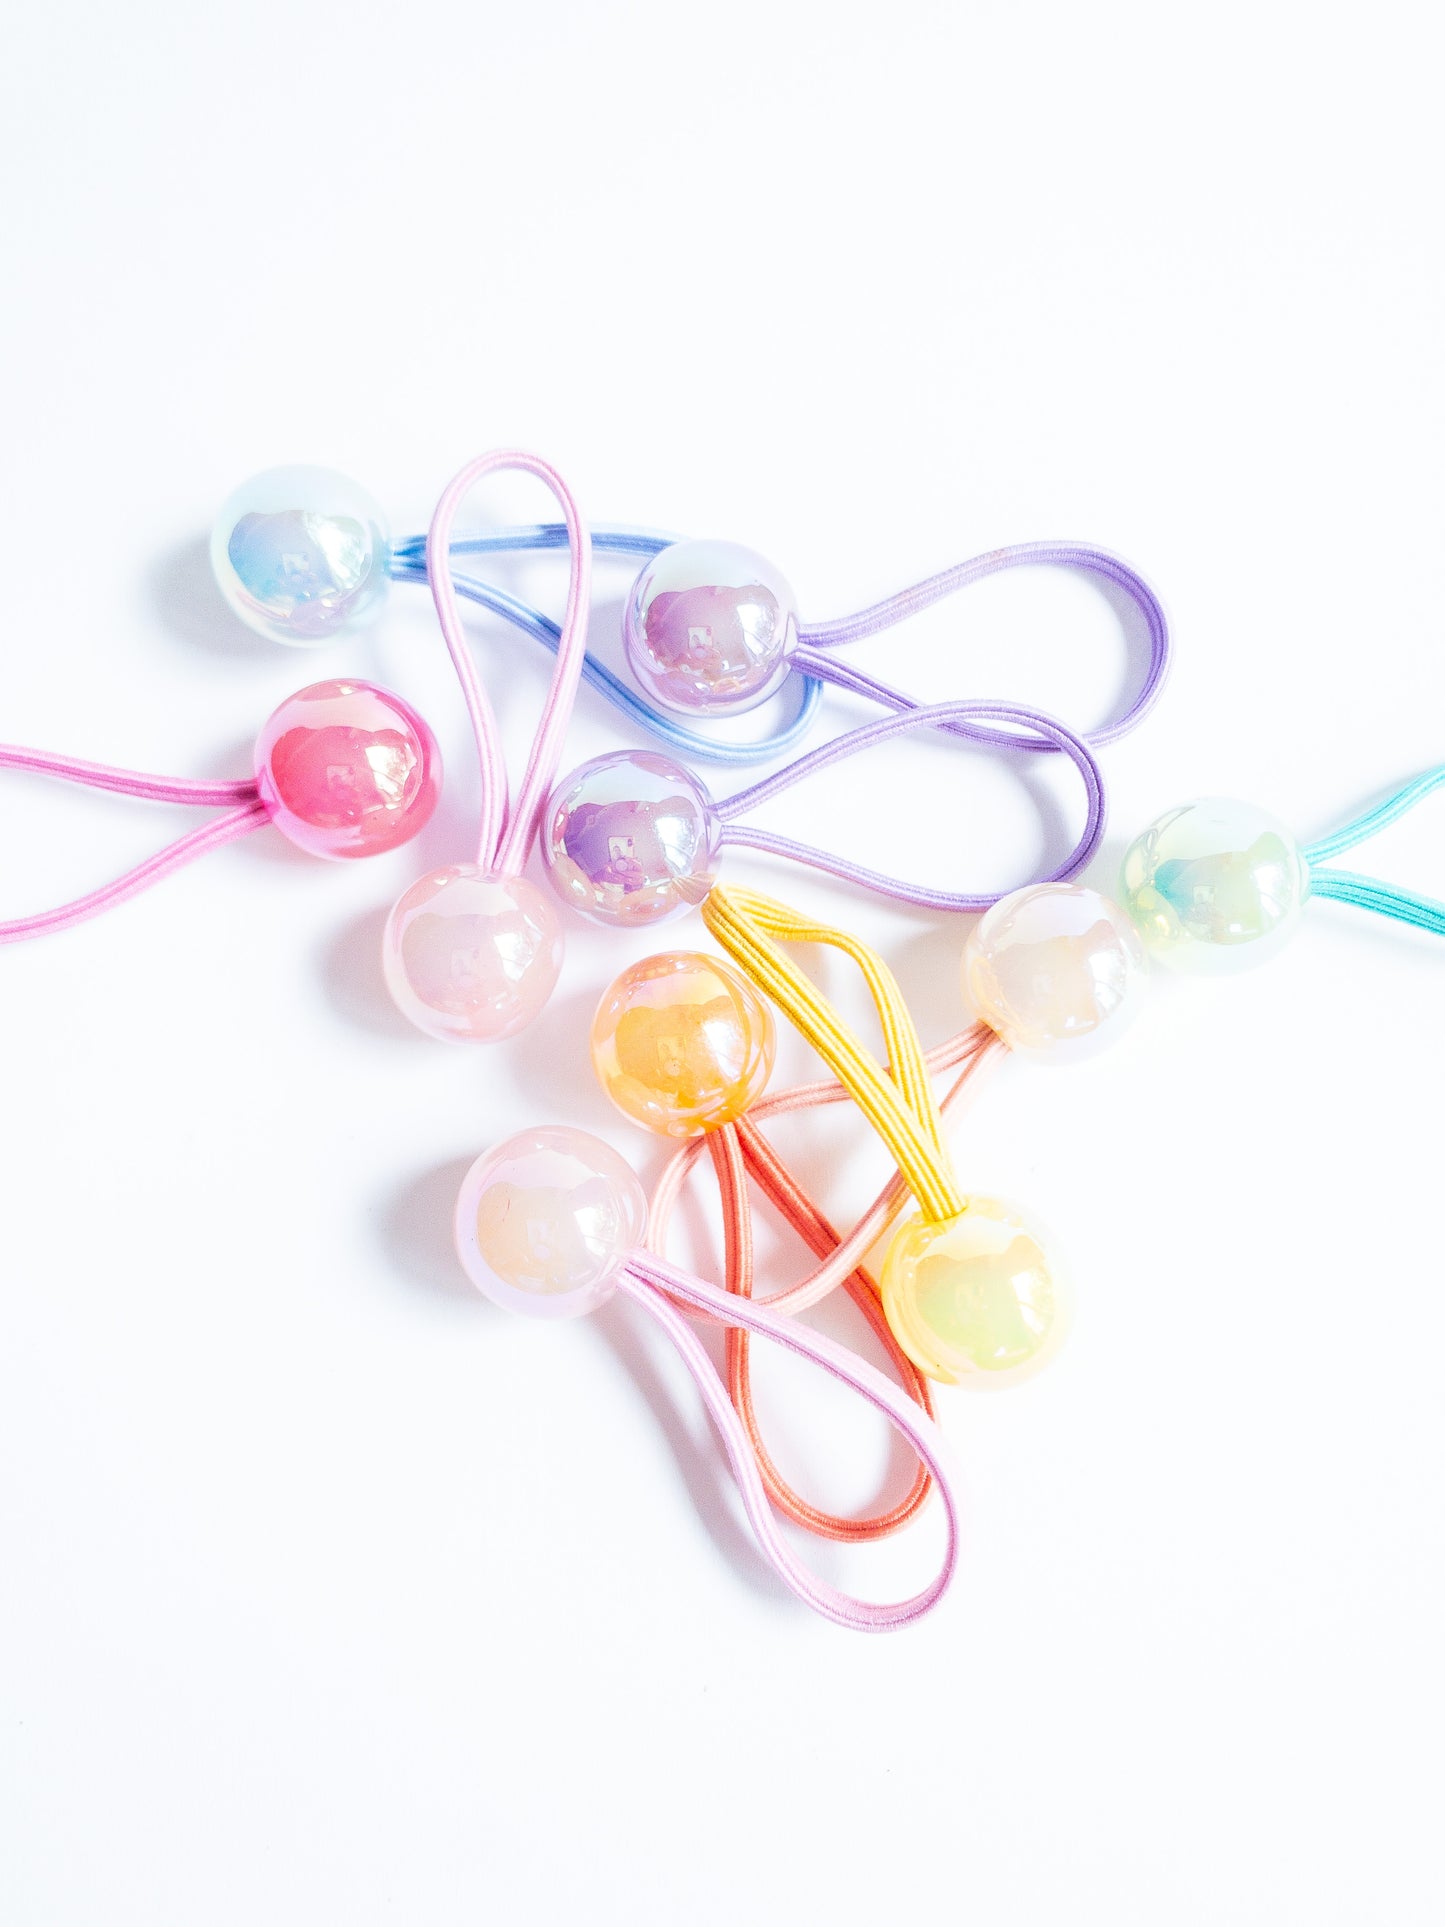 Dreamy, iridescent bubble ball hair ties! These pearly hair ties glisten and gleam in candy taffy colors. They're strong enough to hold hairstyles and cute enough to wear them all at once. Each set contains 10 hai